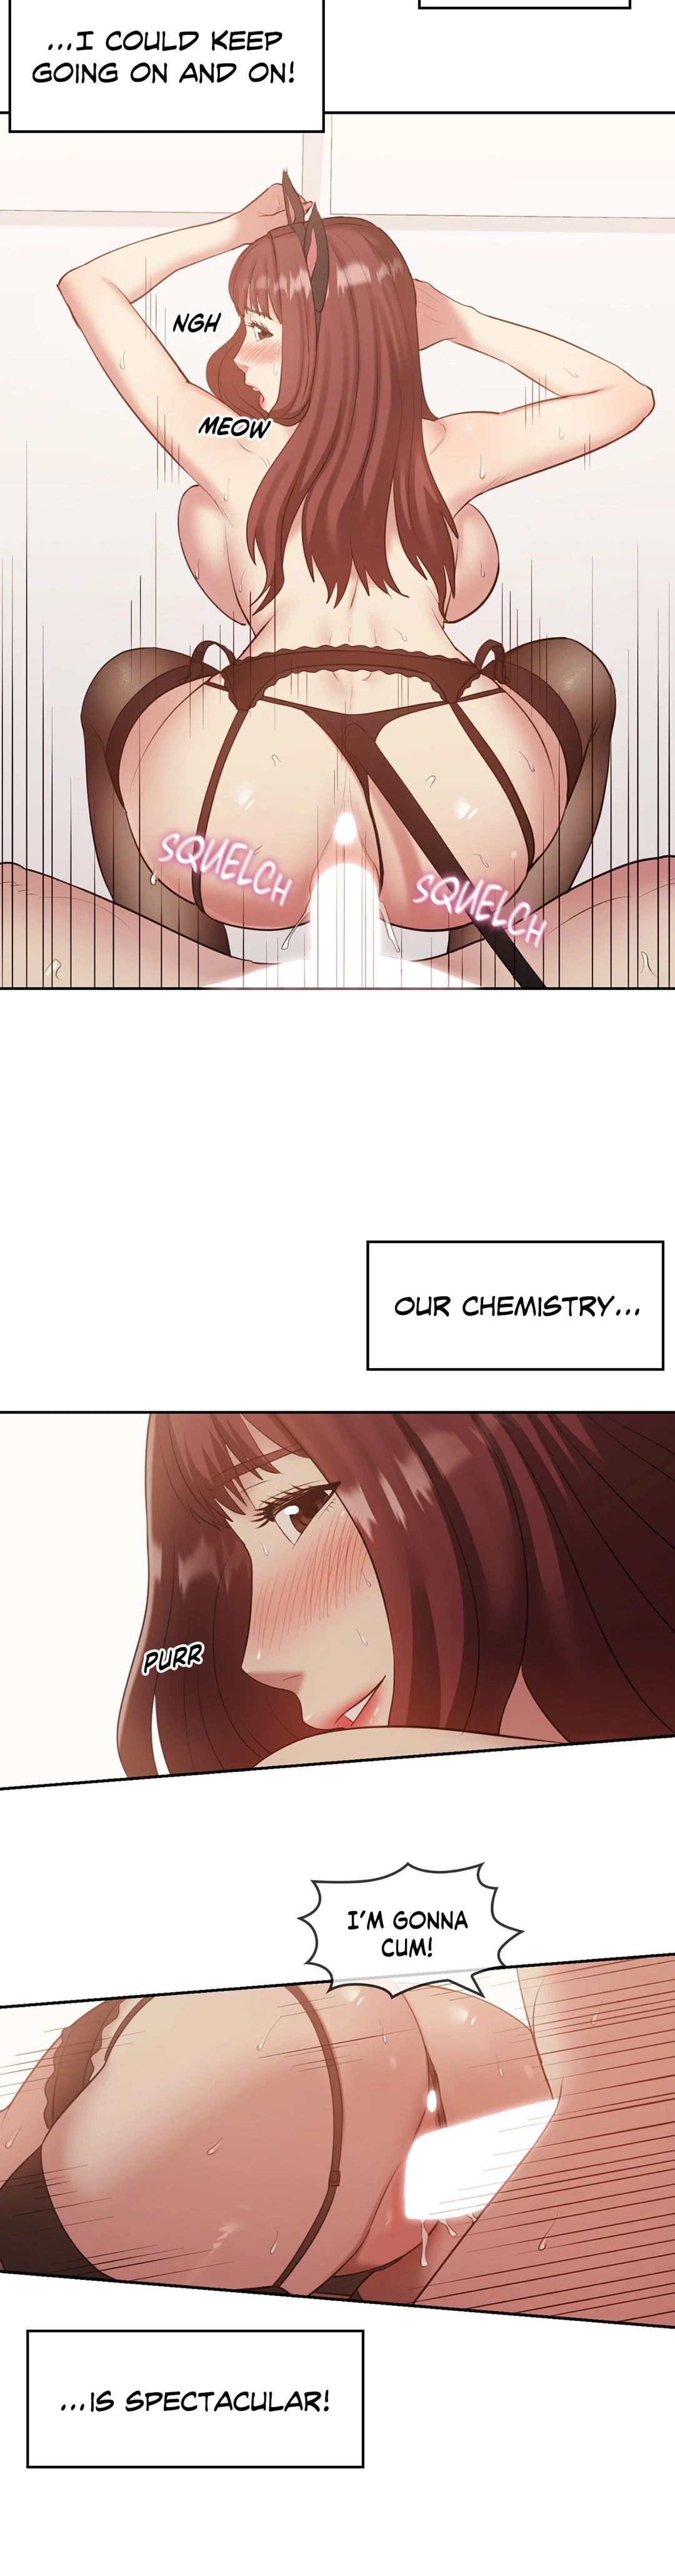 Chemistry Experiments Chapter 50 - Page 22